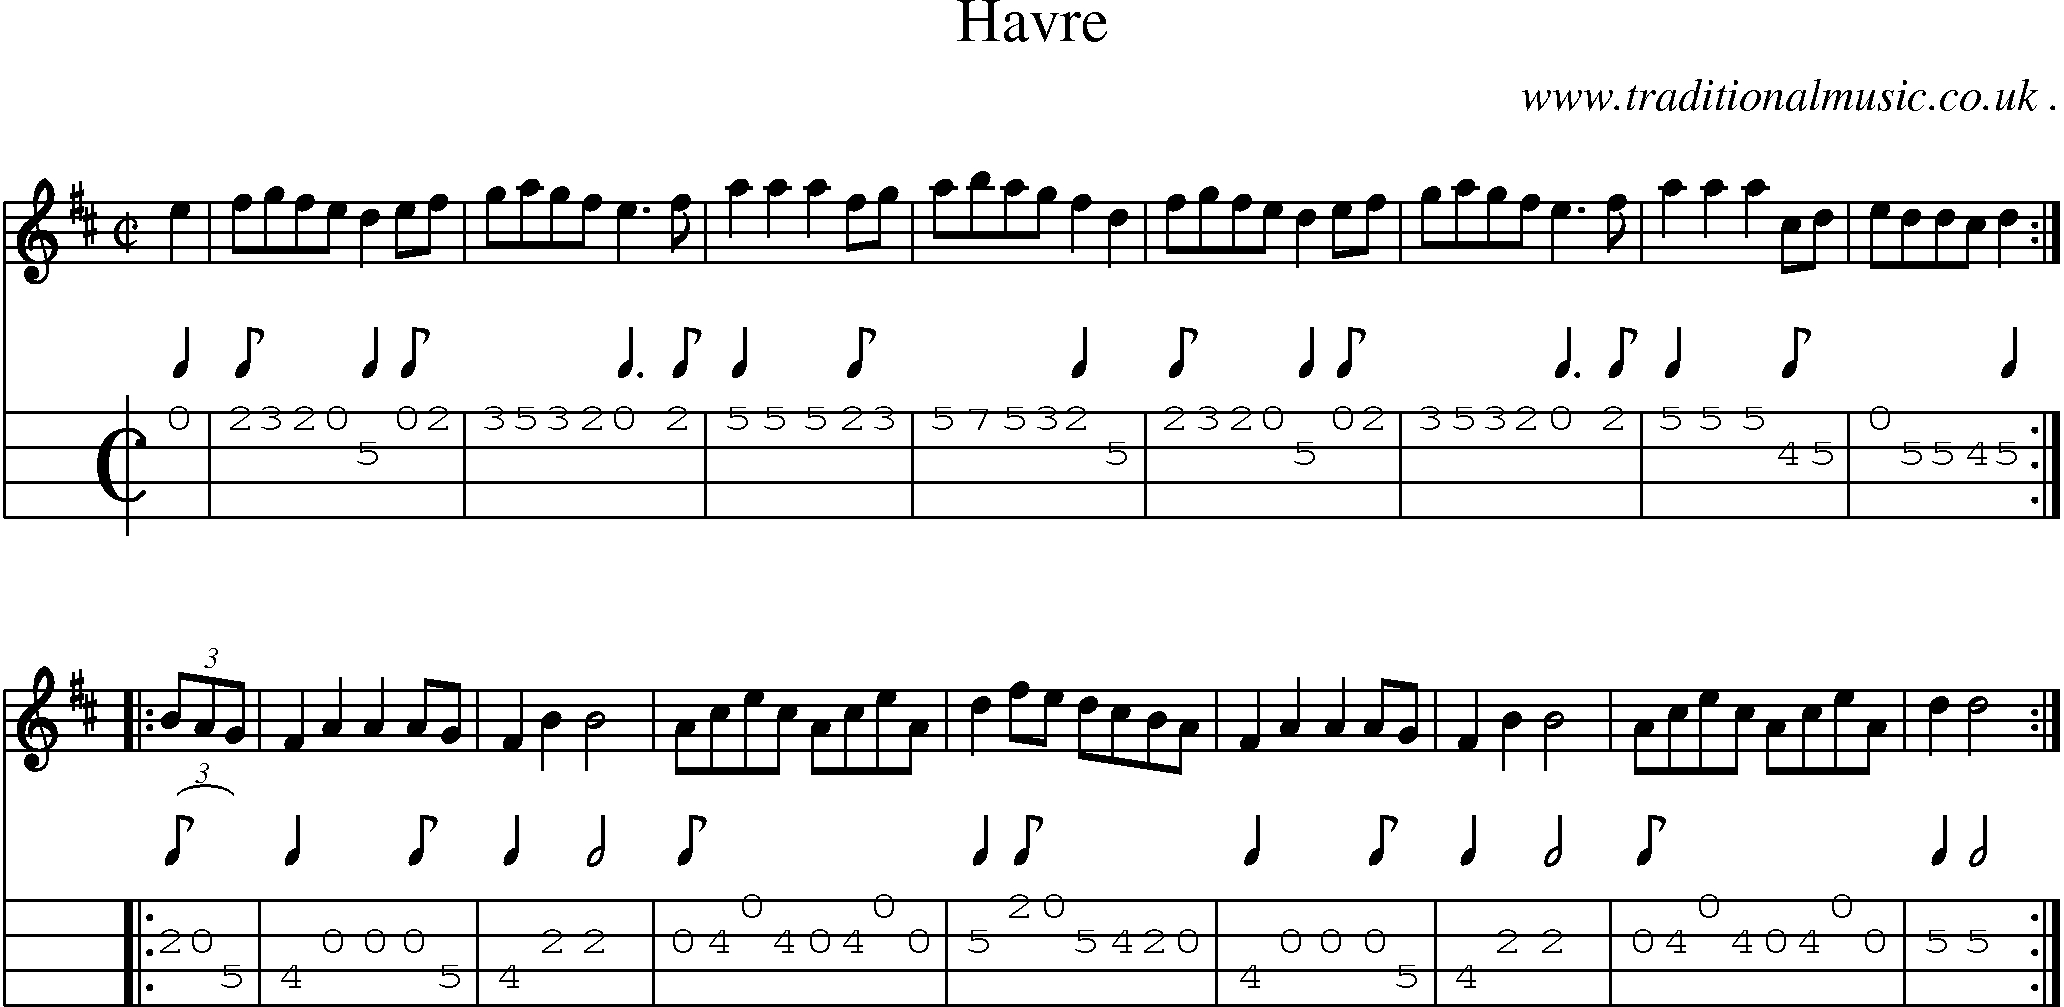 Music Score and Mandolin Tabs for Havre